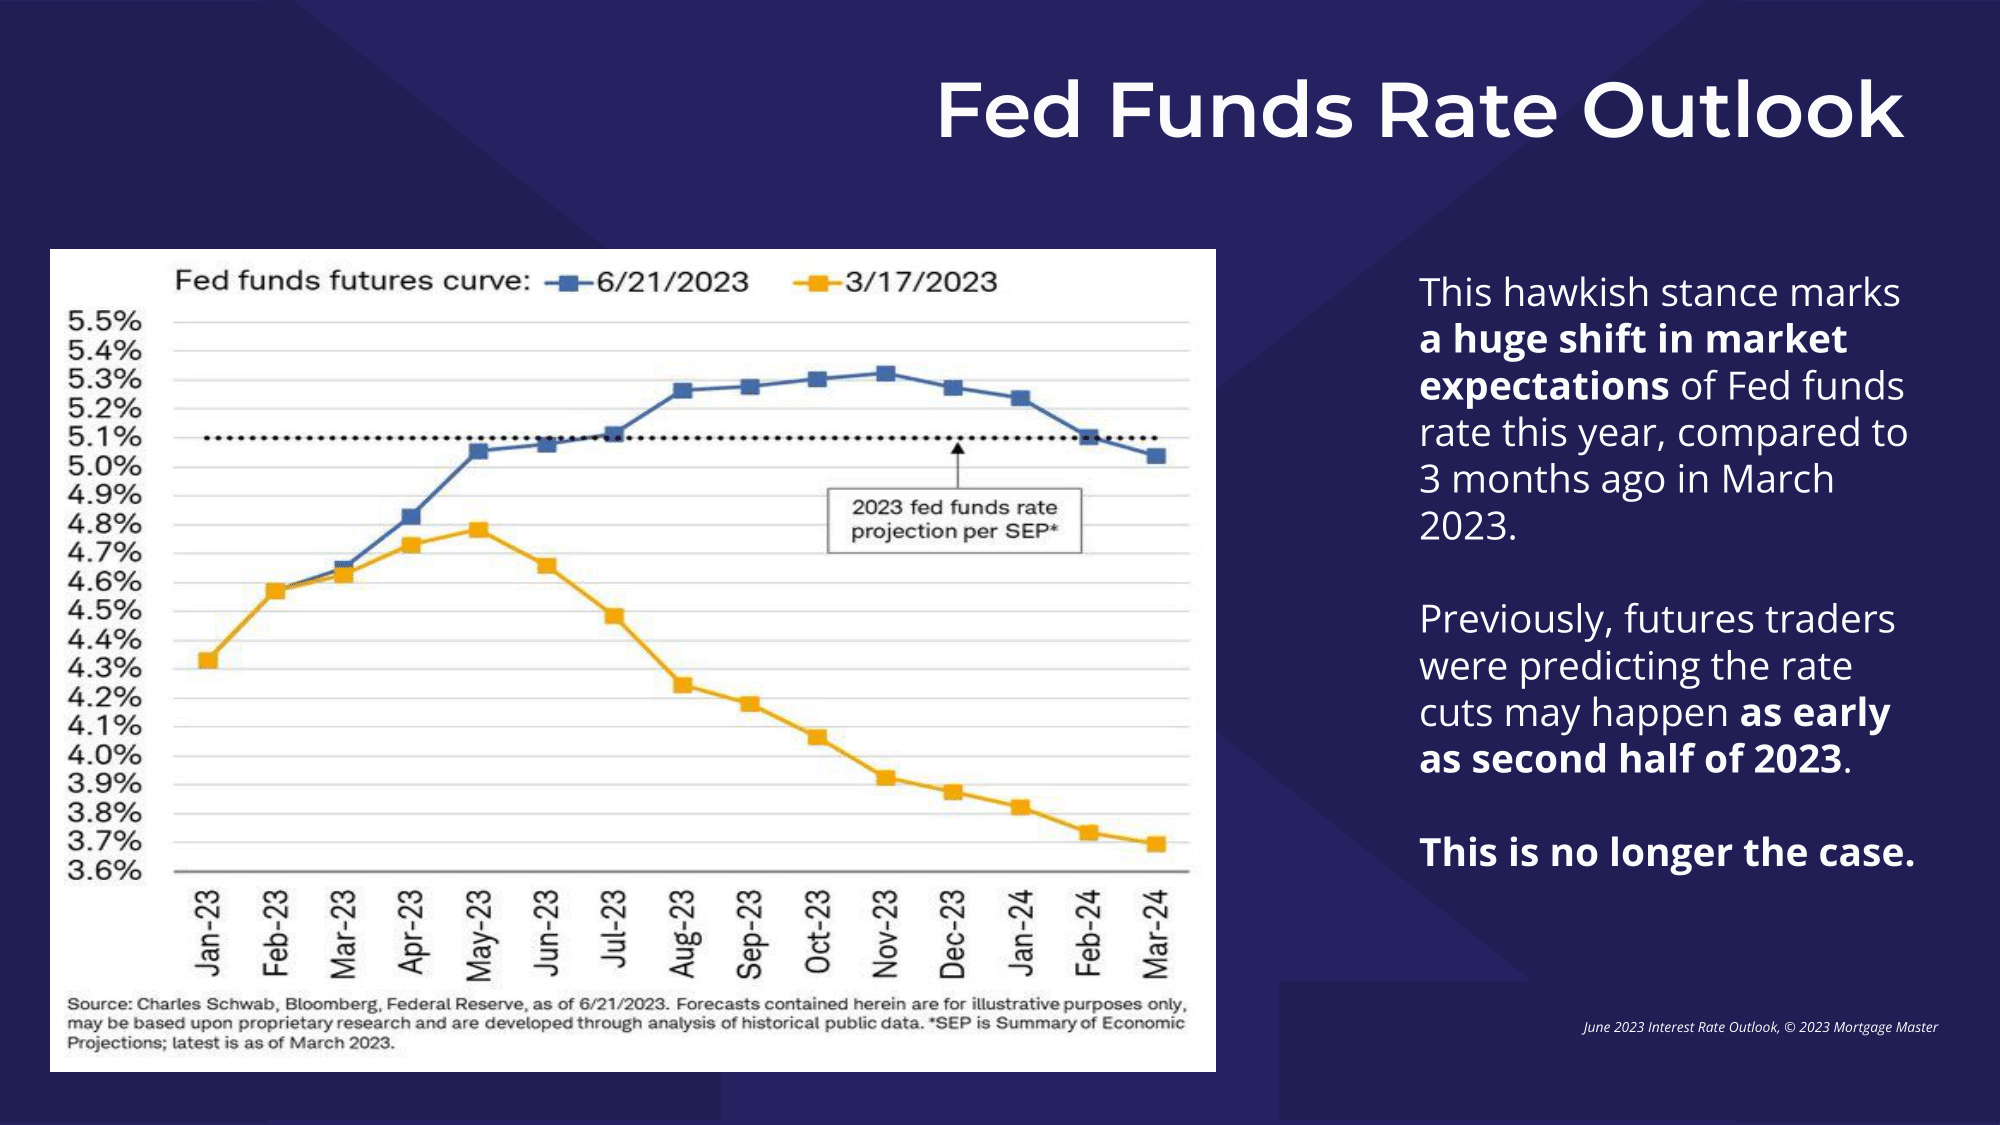 Fed funds futures curve